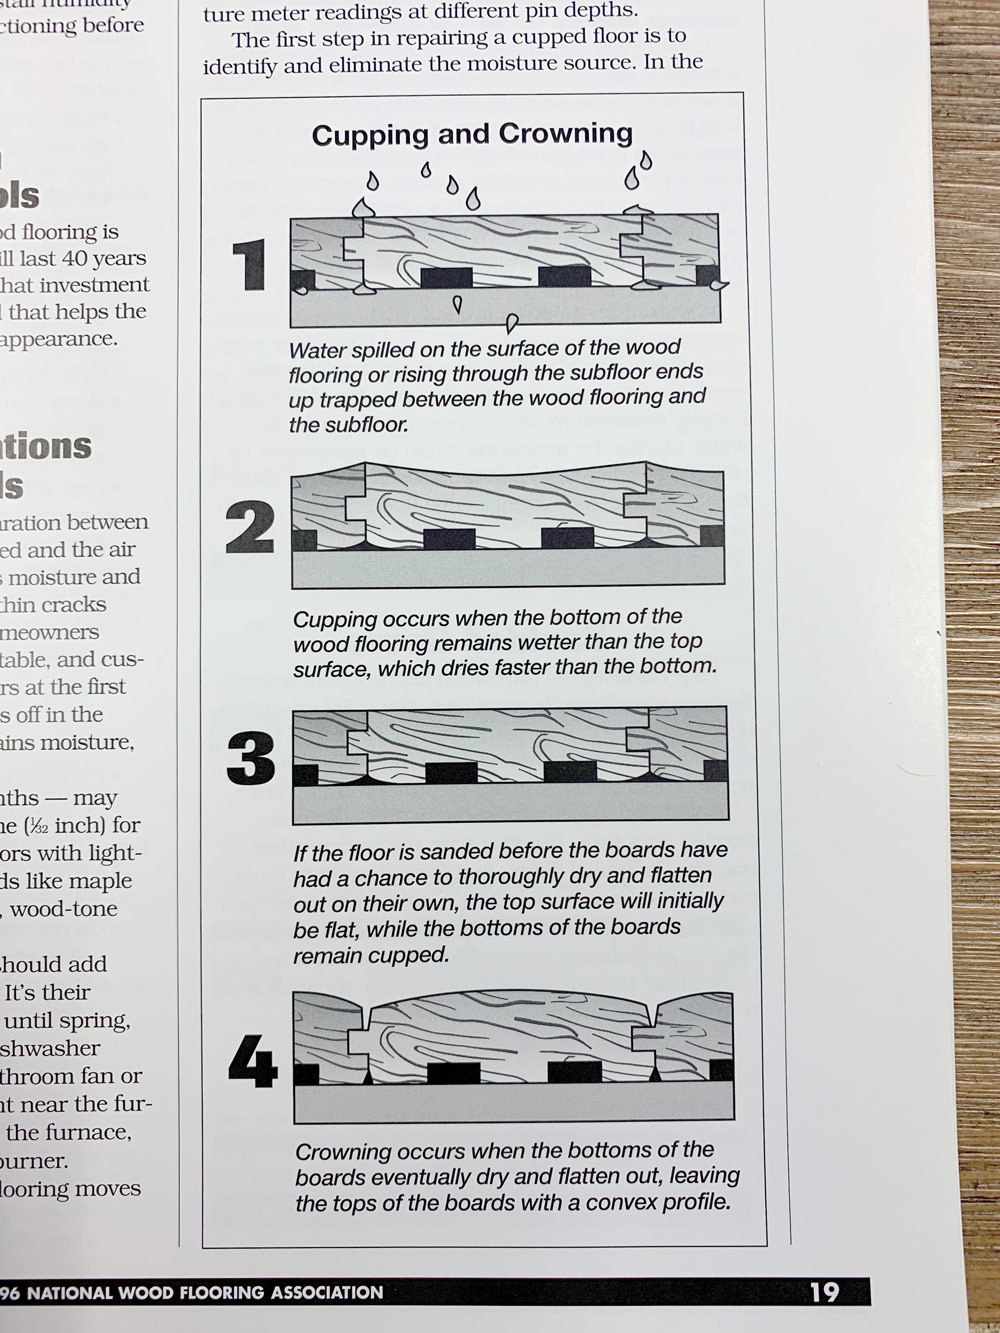 Cupping and crowning of hardwood floors illustration from NWFA publication 2019 